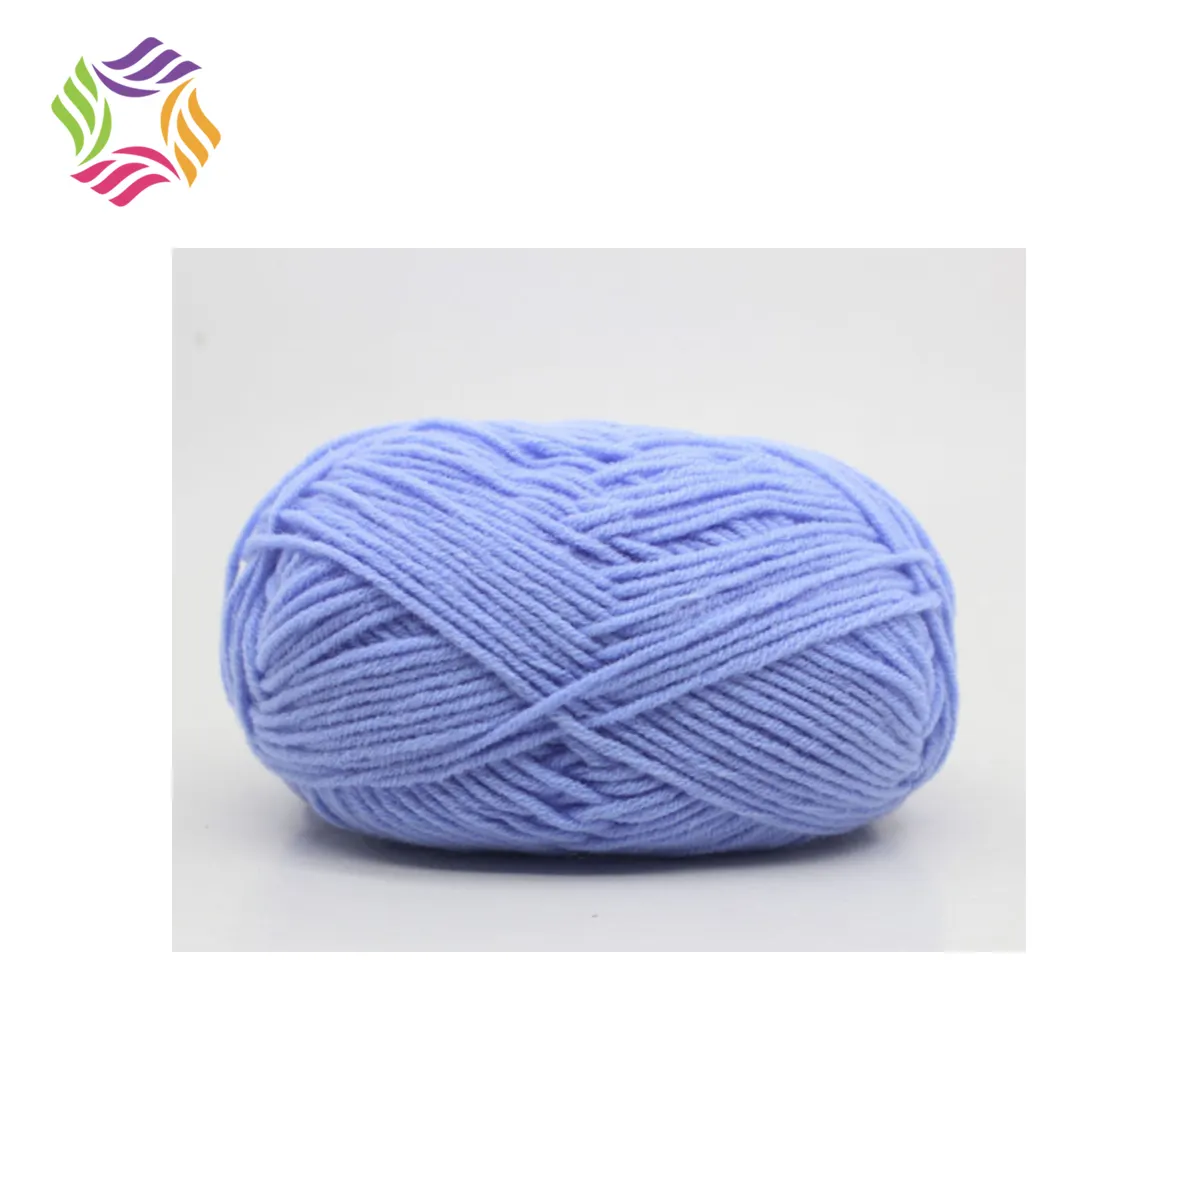 Baby Cotton Yarn Charmkey Cheap Price Bright Color 5 Ply 2.5 Mm Milk Cotton Yarn 50g For Hand Knitting Baby Sweater Soft Hat Free Sample In Stock